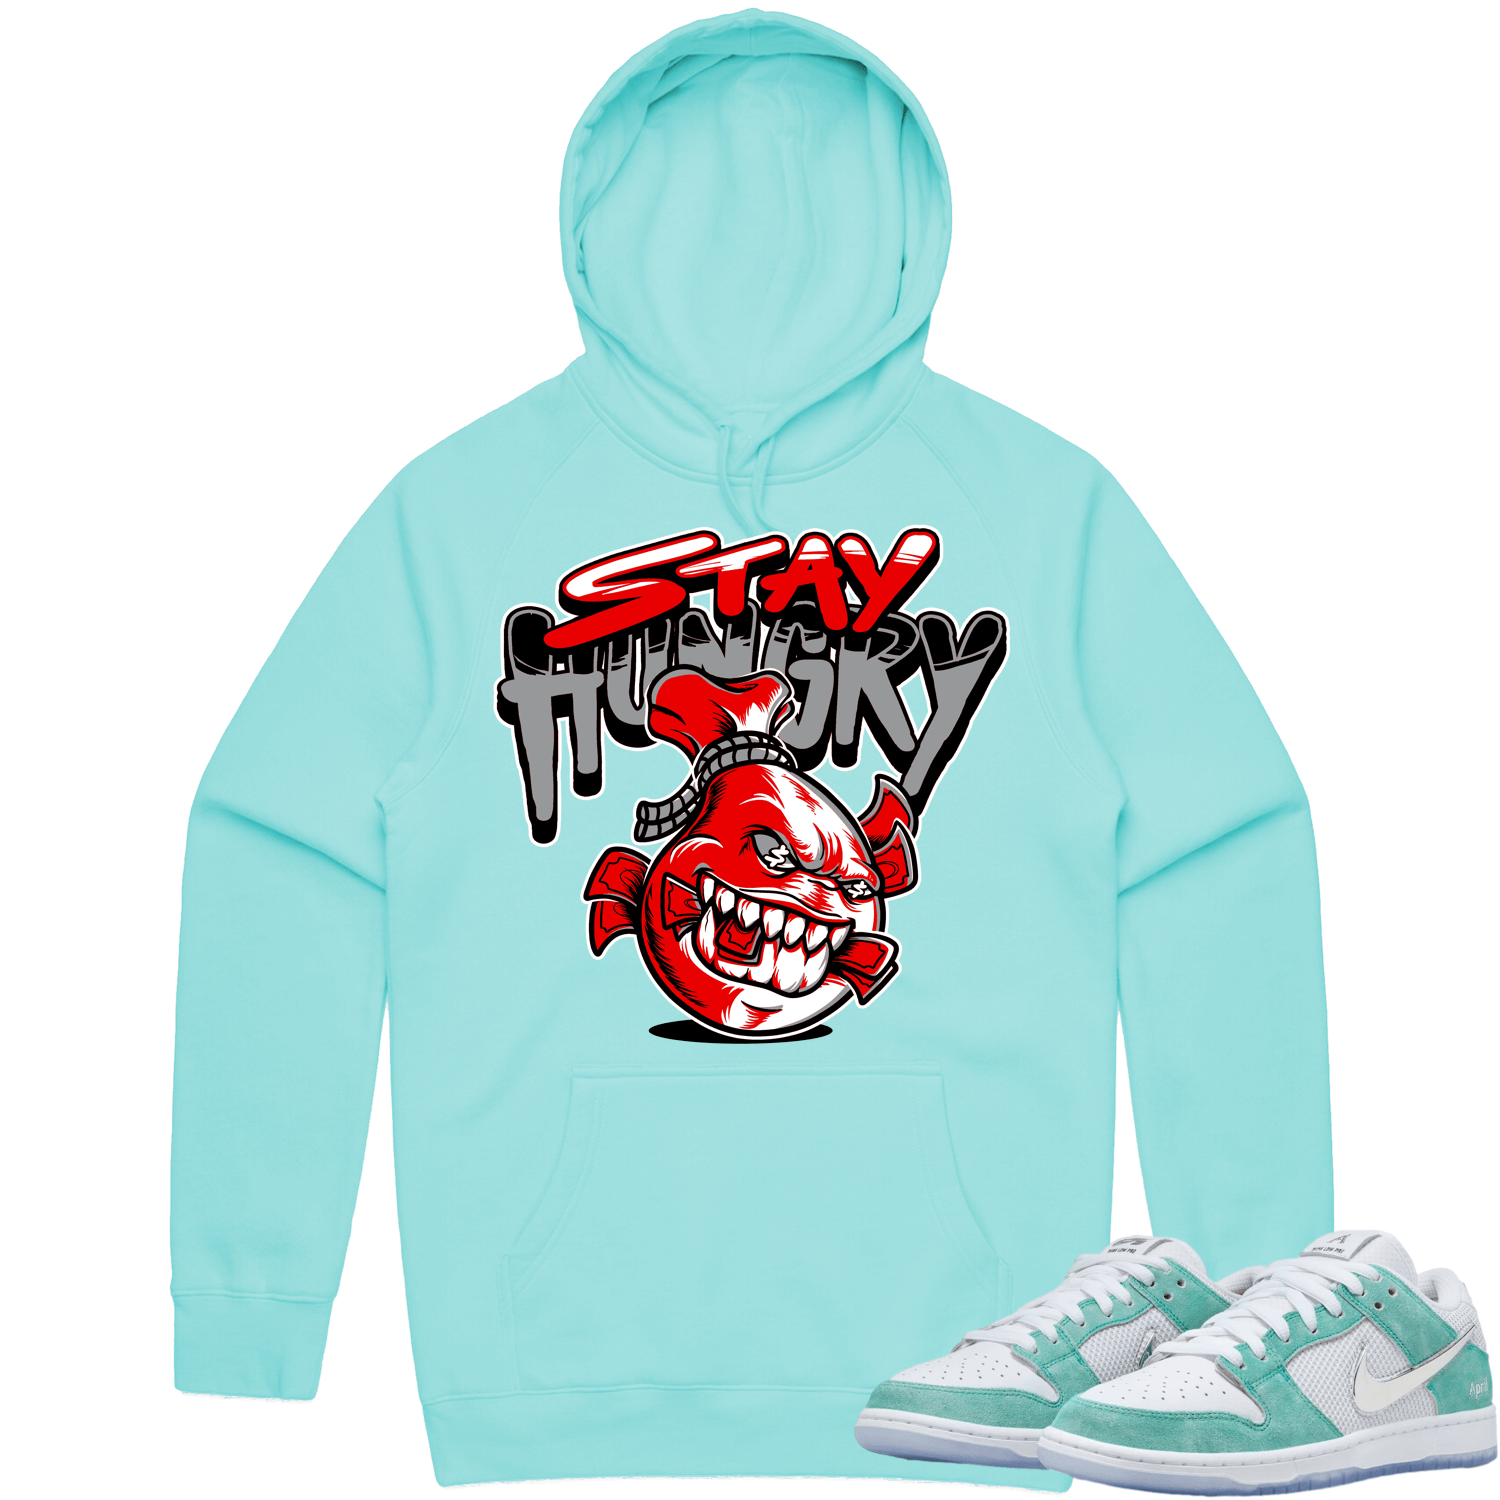 April Dunks Hoodie - April Turbo Green Dunks Shirts - Stay Hungry